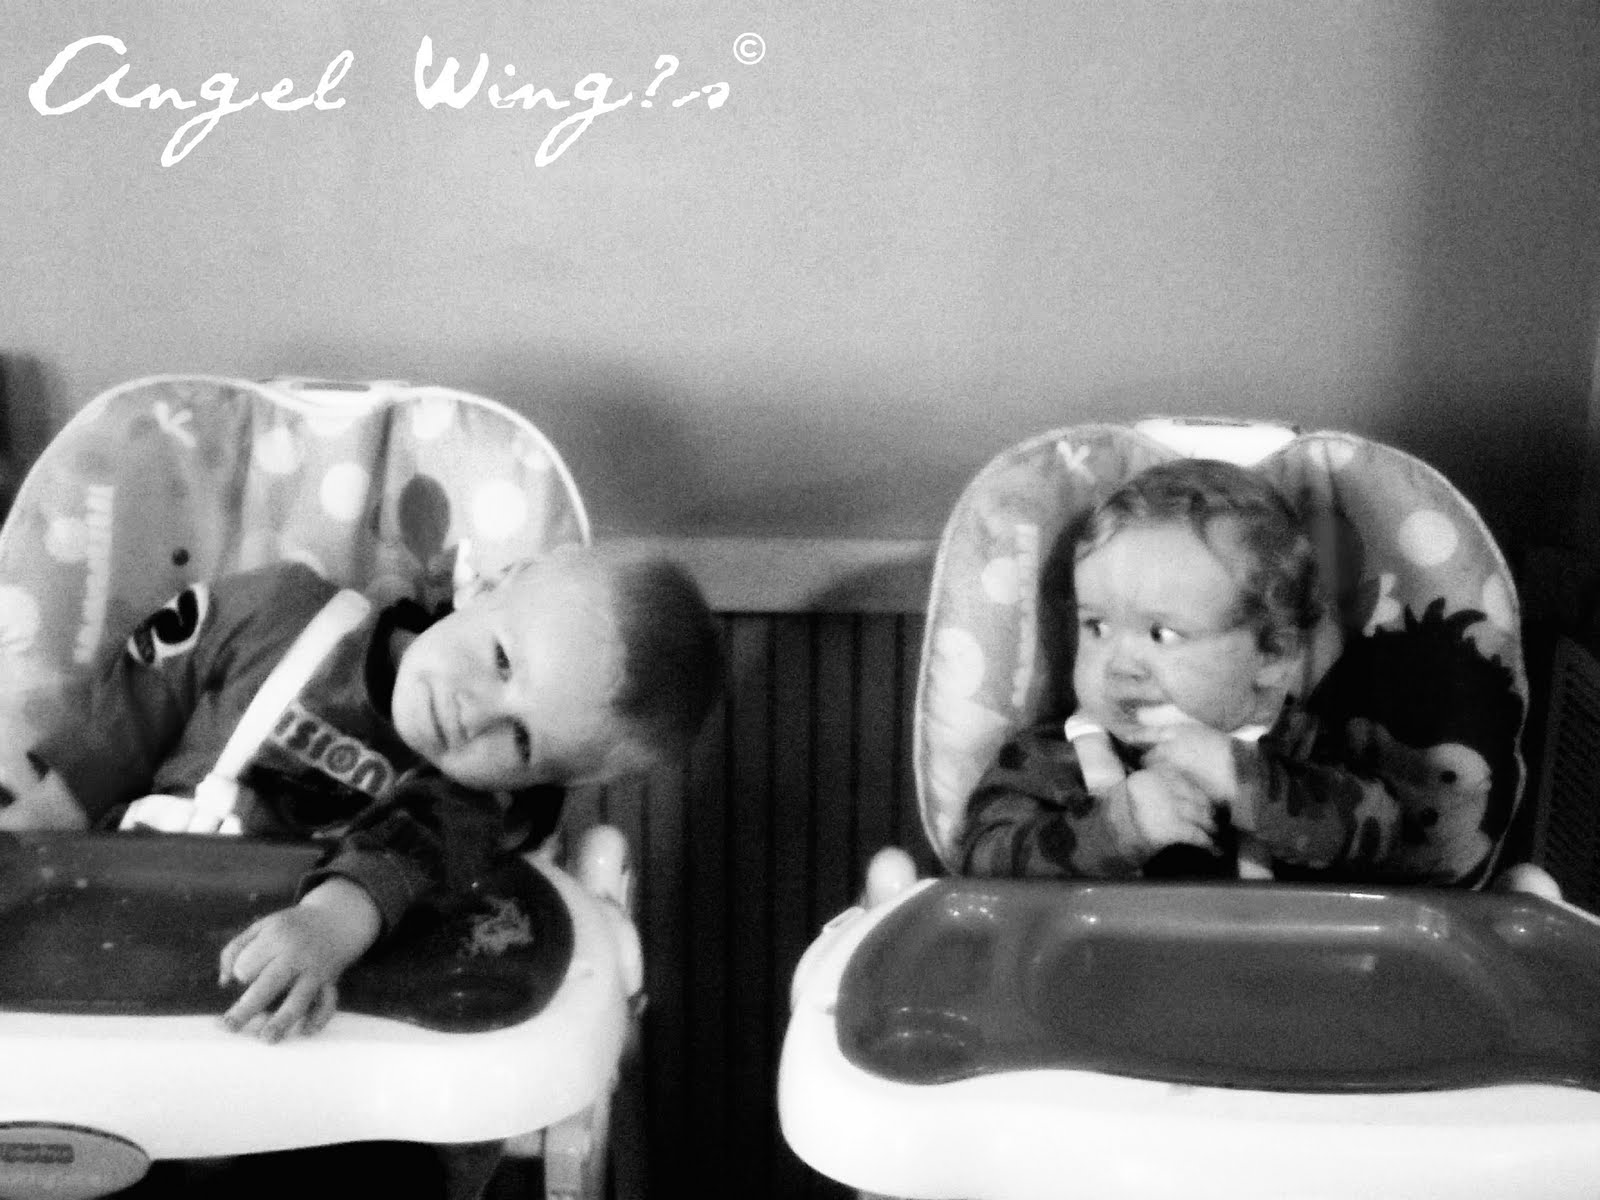 K.S. - Angels Wings Photography